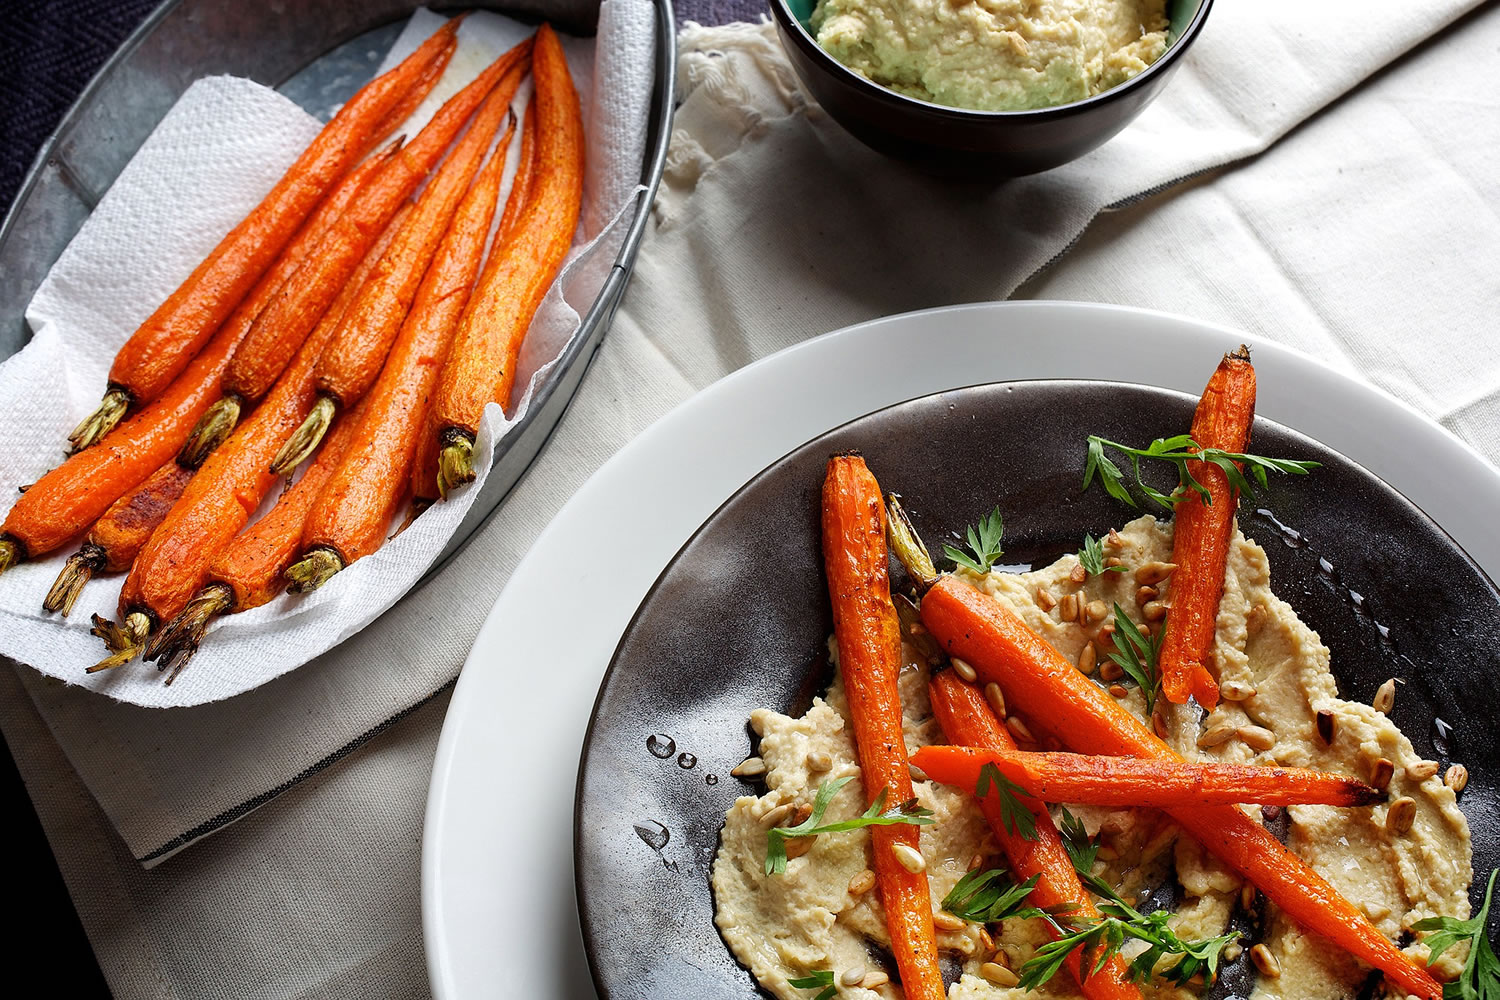 Hummus Plate With Cumin-Roasted Carrots.